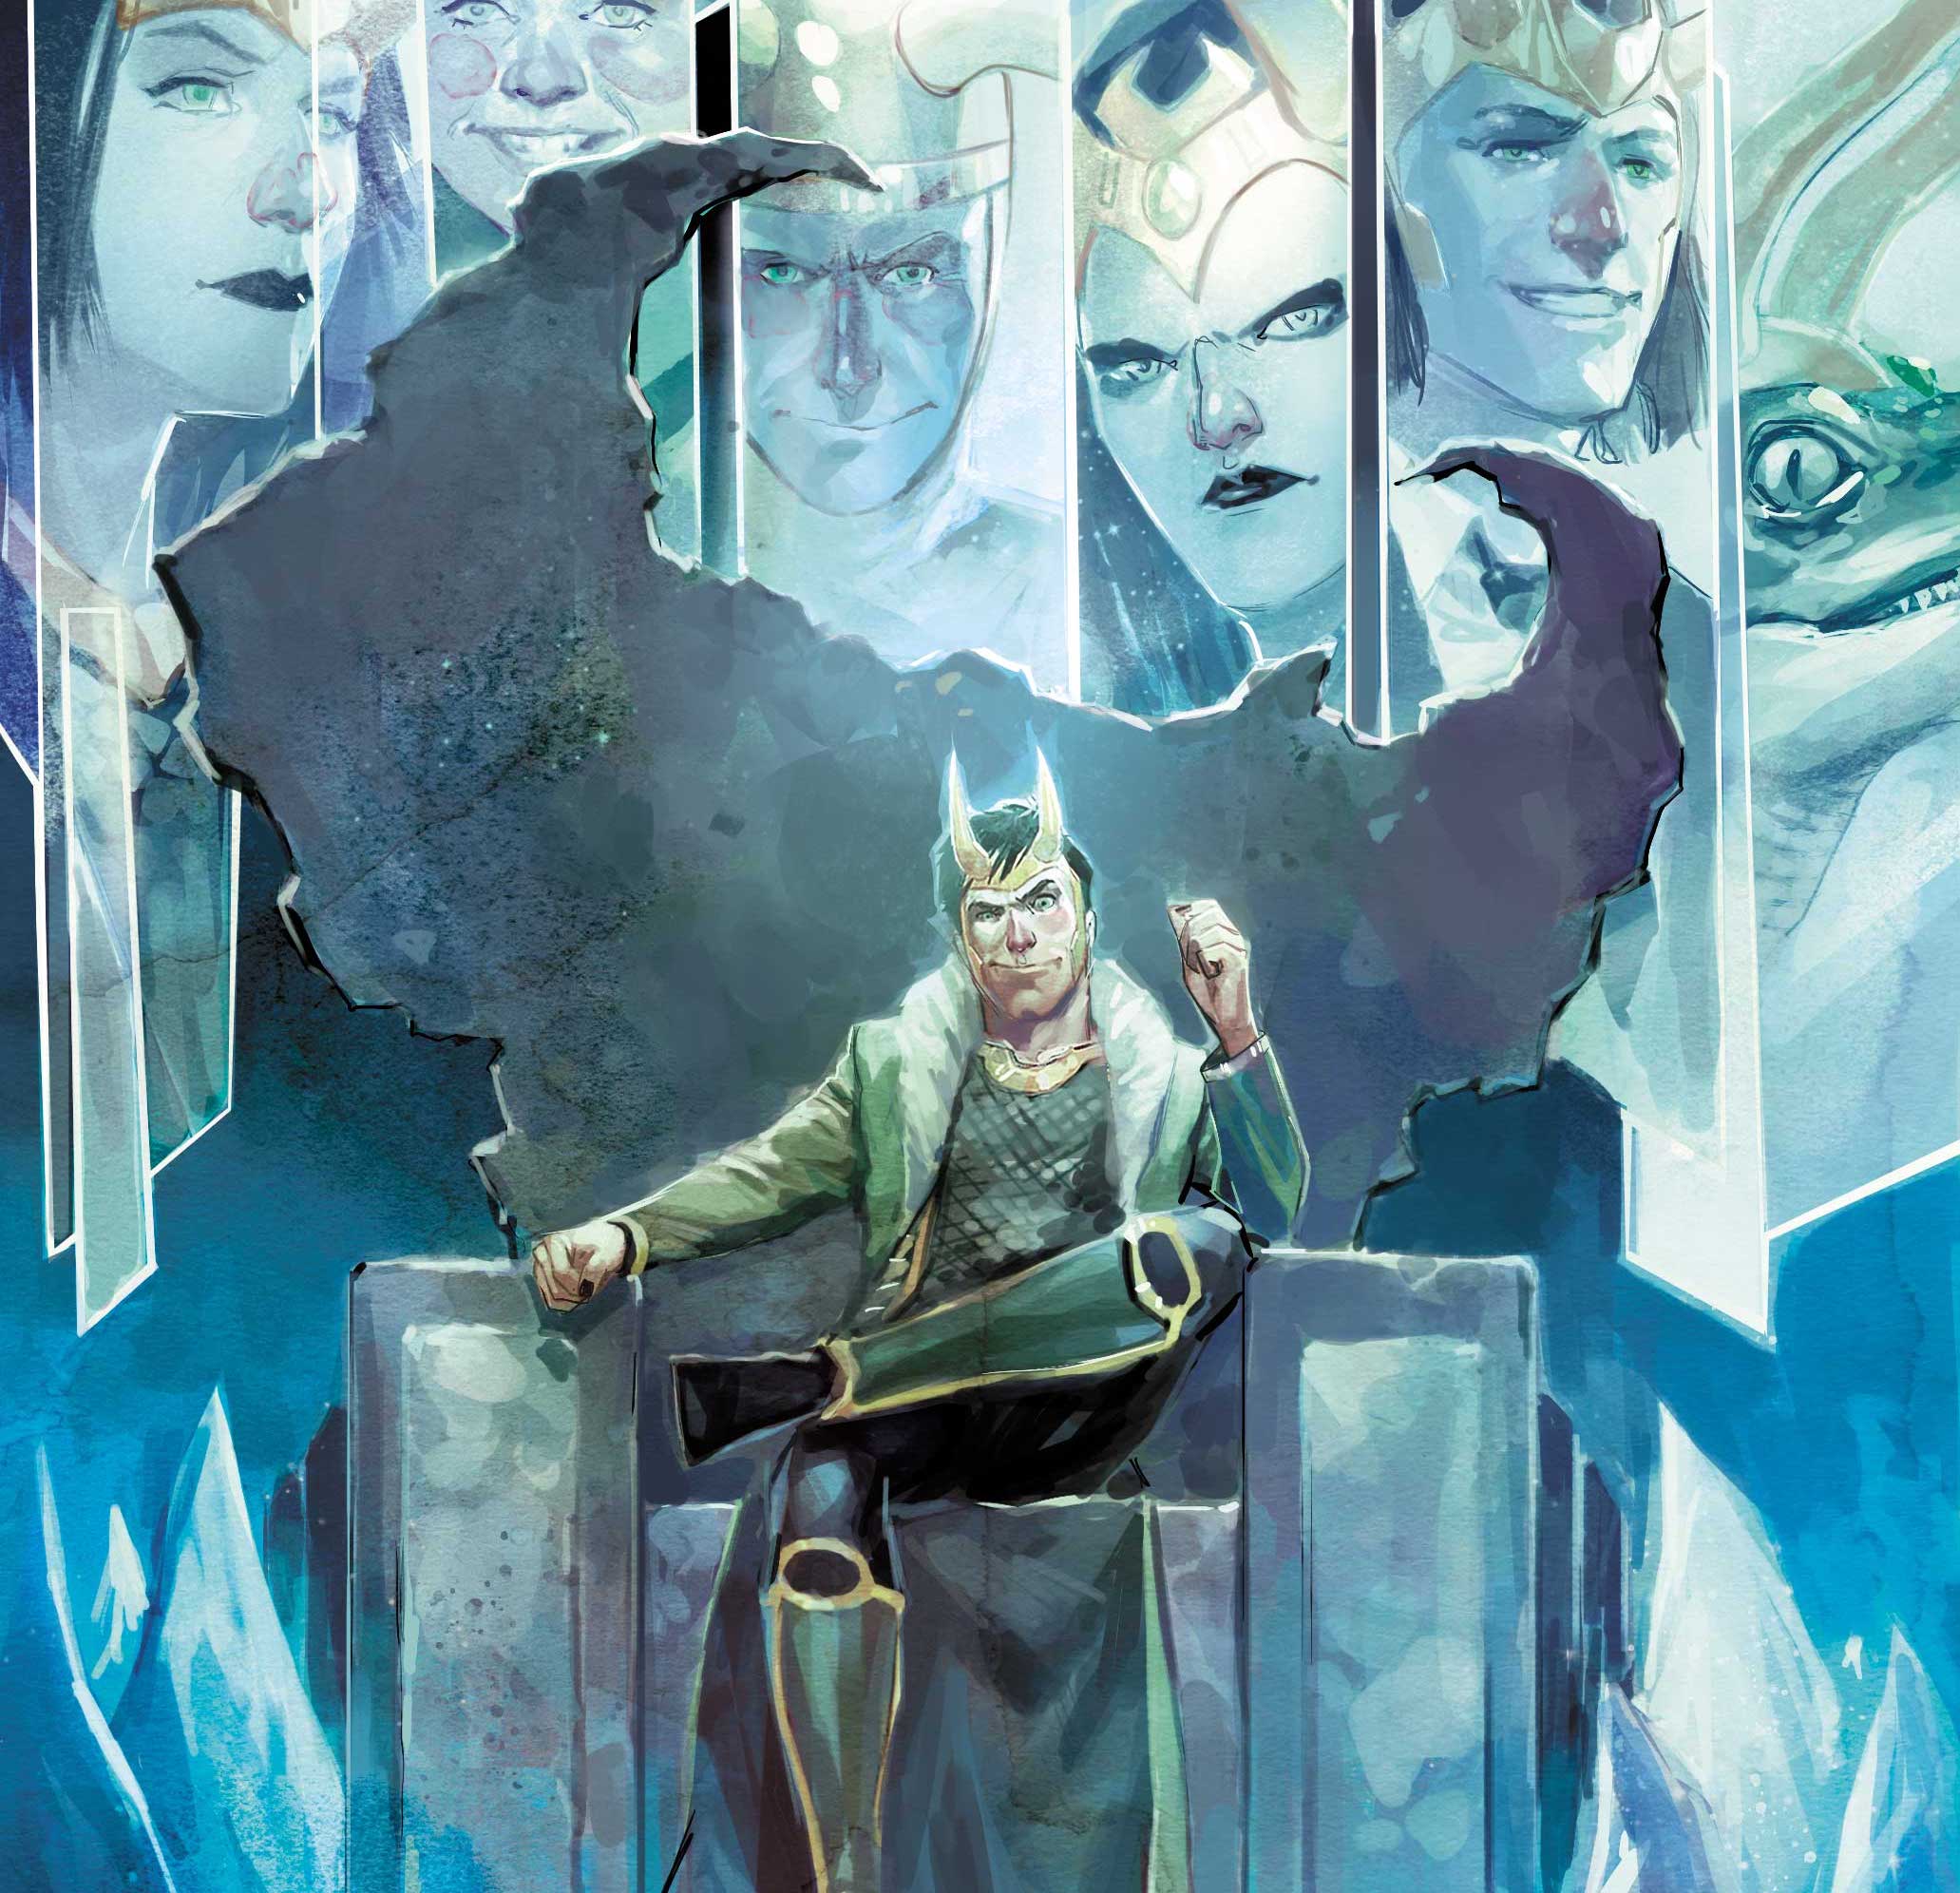 'Loki' scores new four-issue series by Dan Watters and Germán Peralta